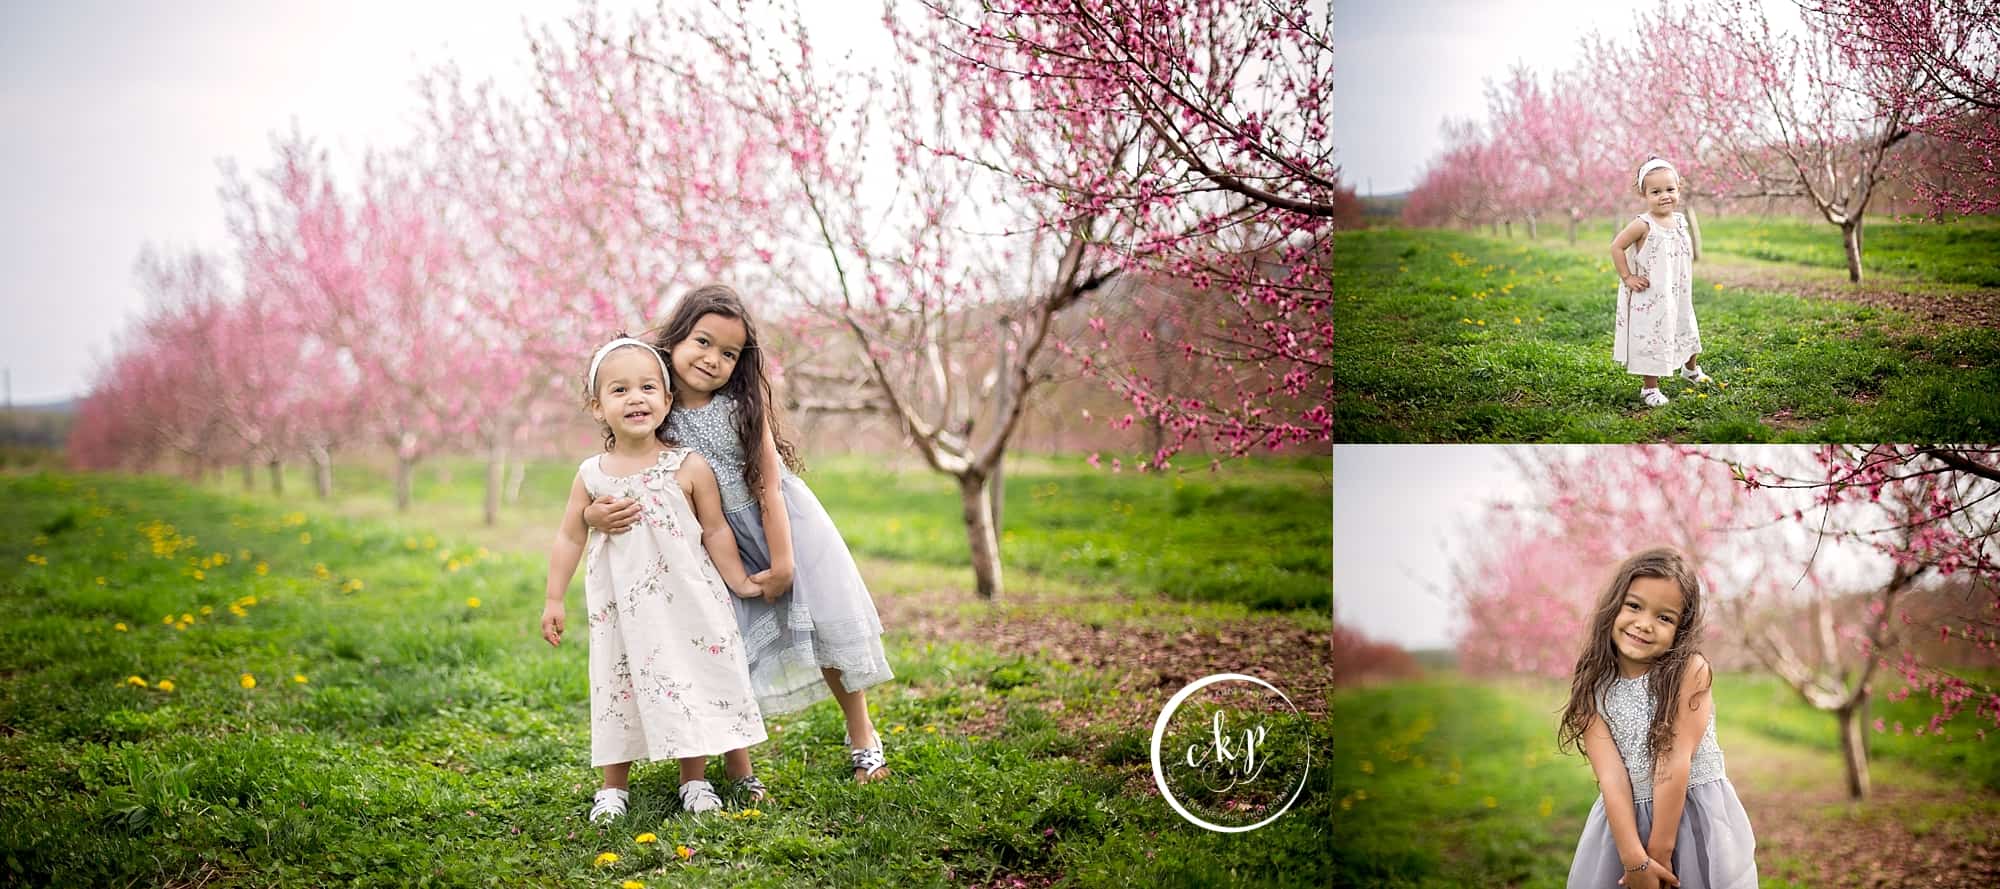 ct photographer at the pear and peach blossoms